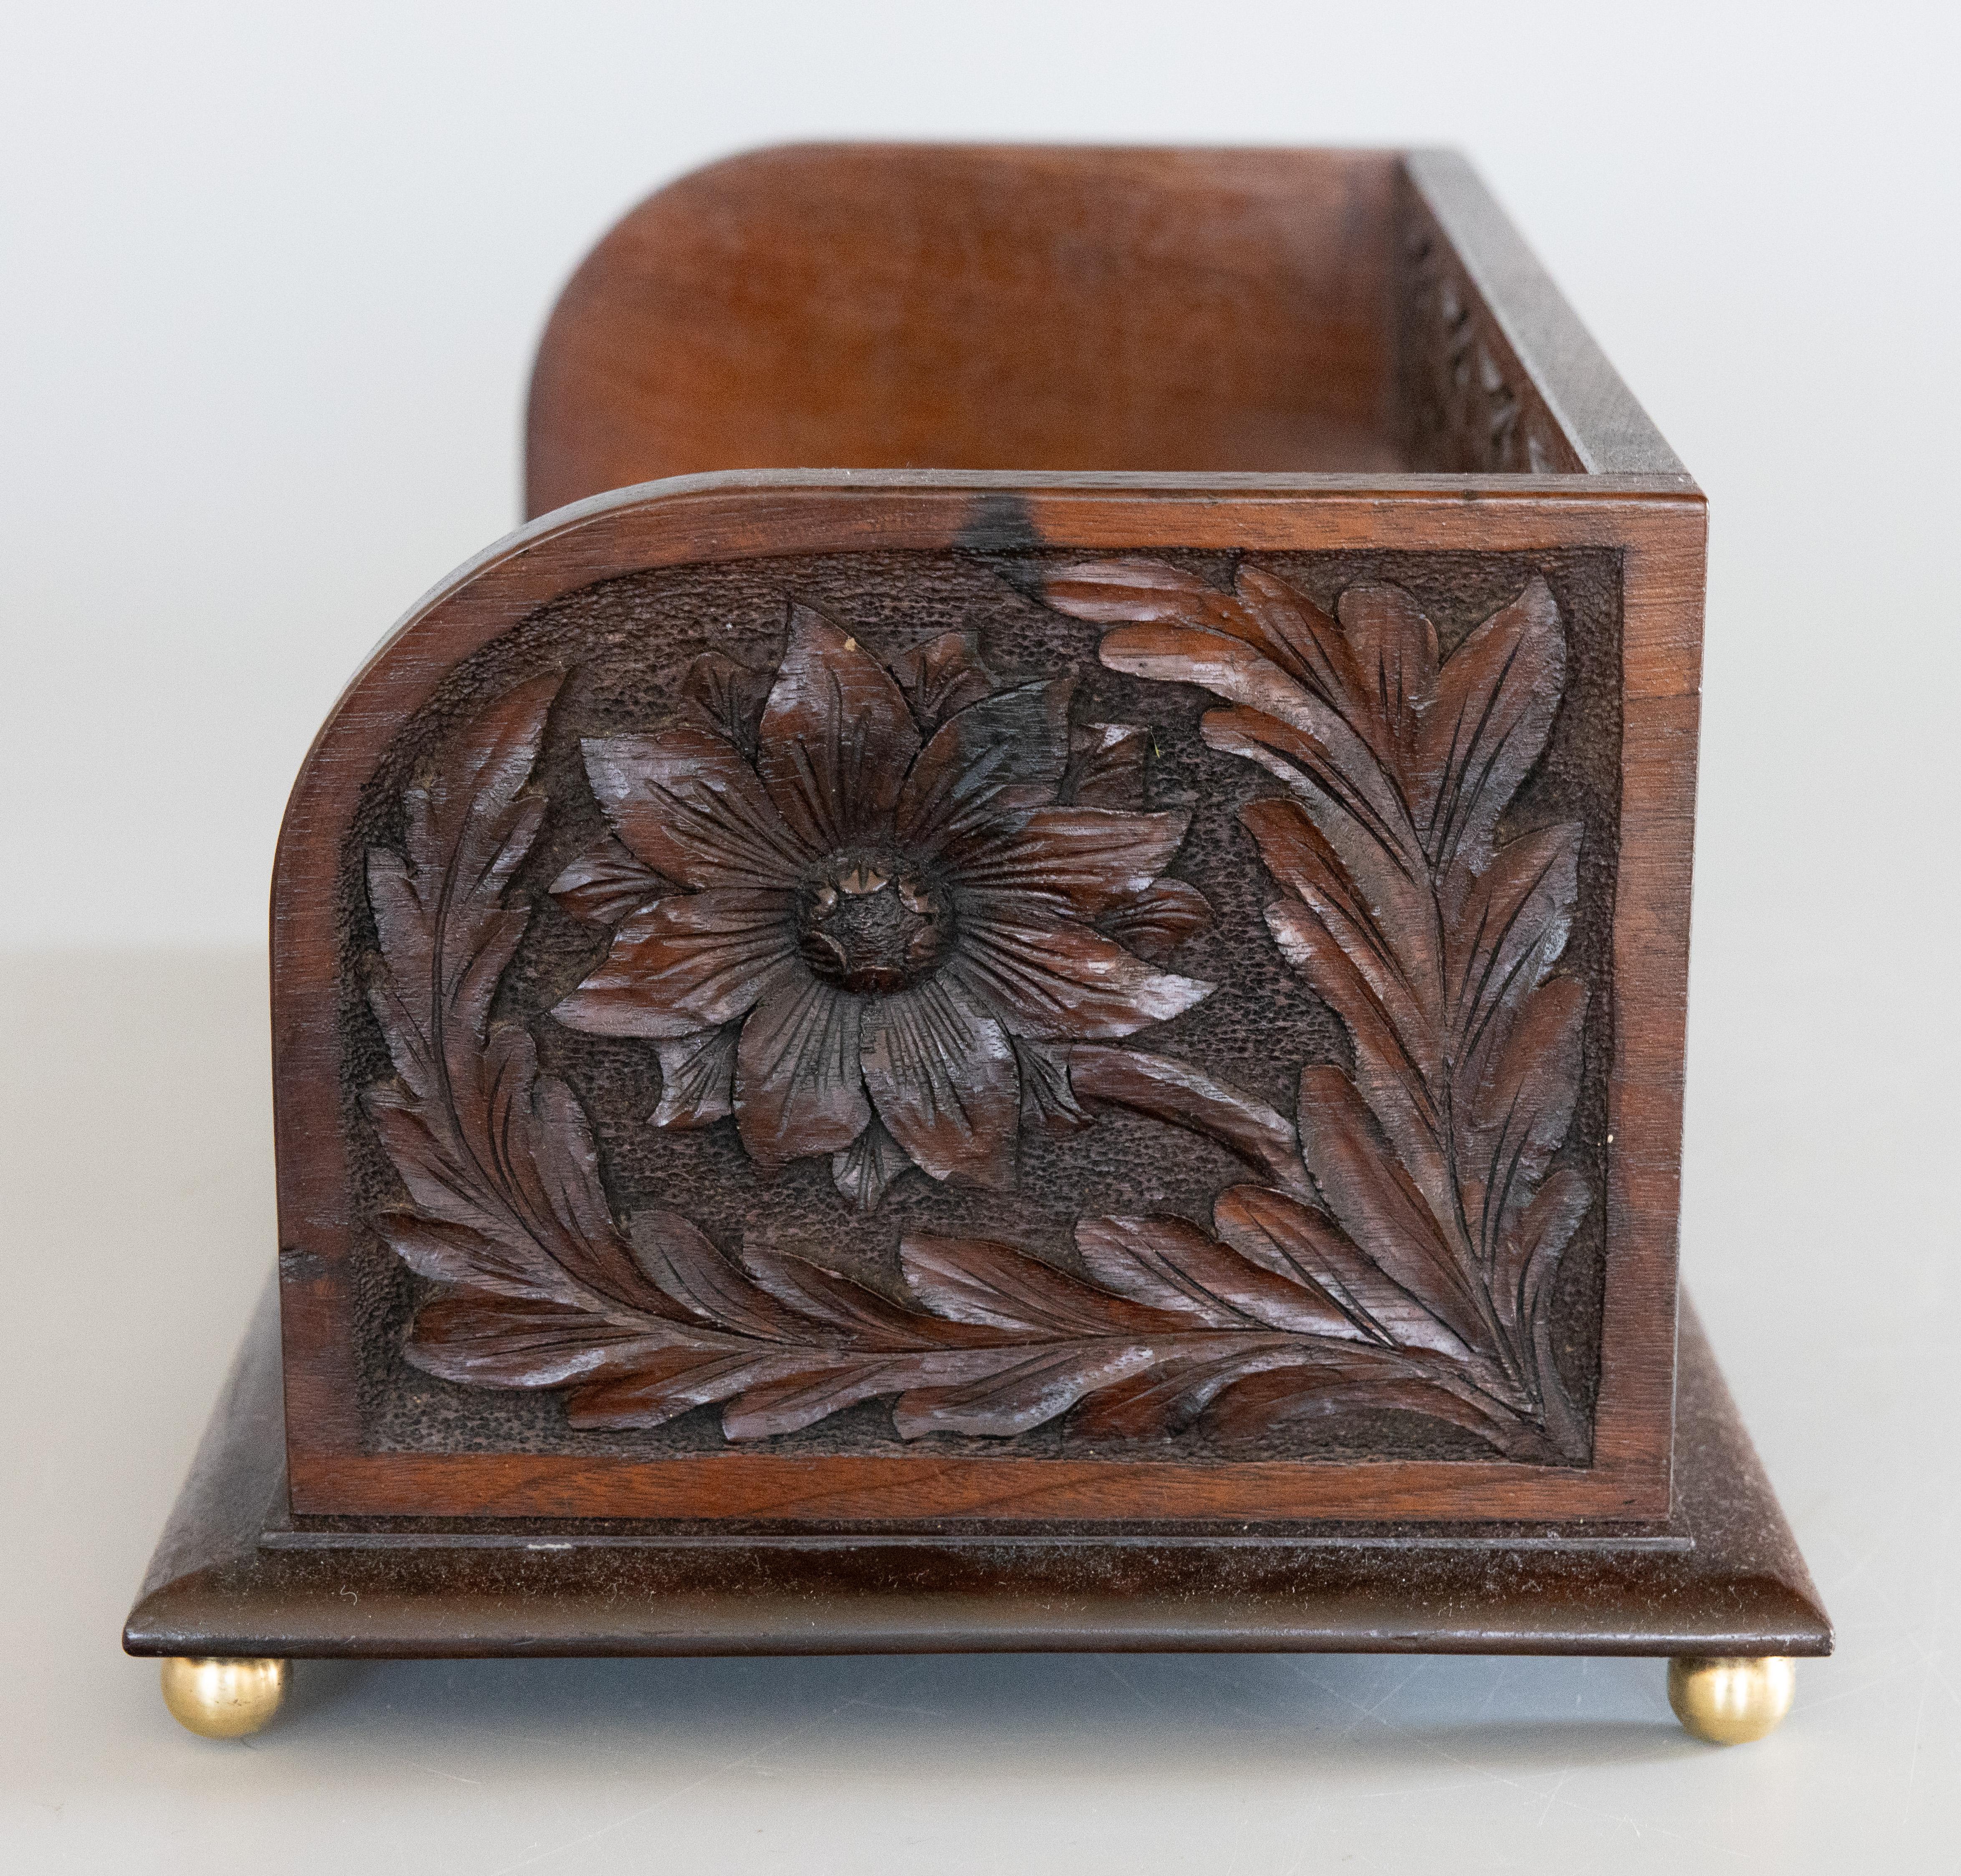 Early 20th Century English Carved Mahogany Table Top Book Trough Rack Stand Bookends, C. 1900 For Sale